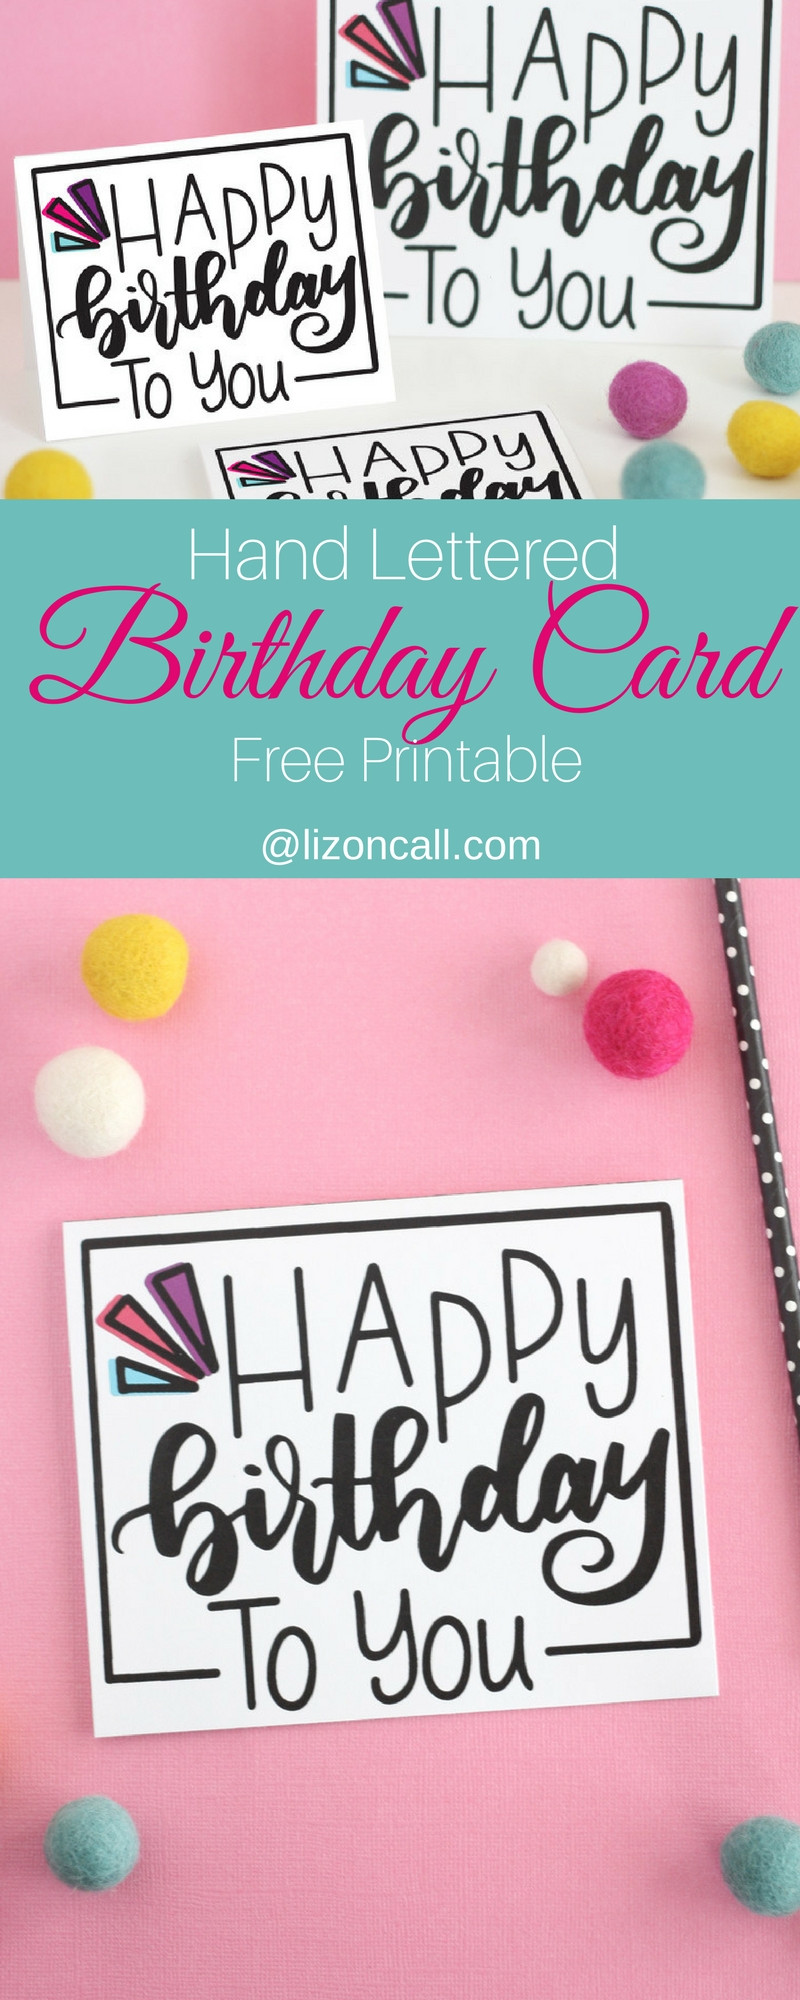 Free Birthday Card Printable
 Hand Lettered Free Printable Birthday Card Liz on Call